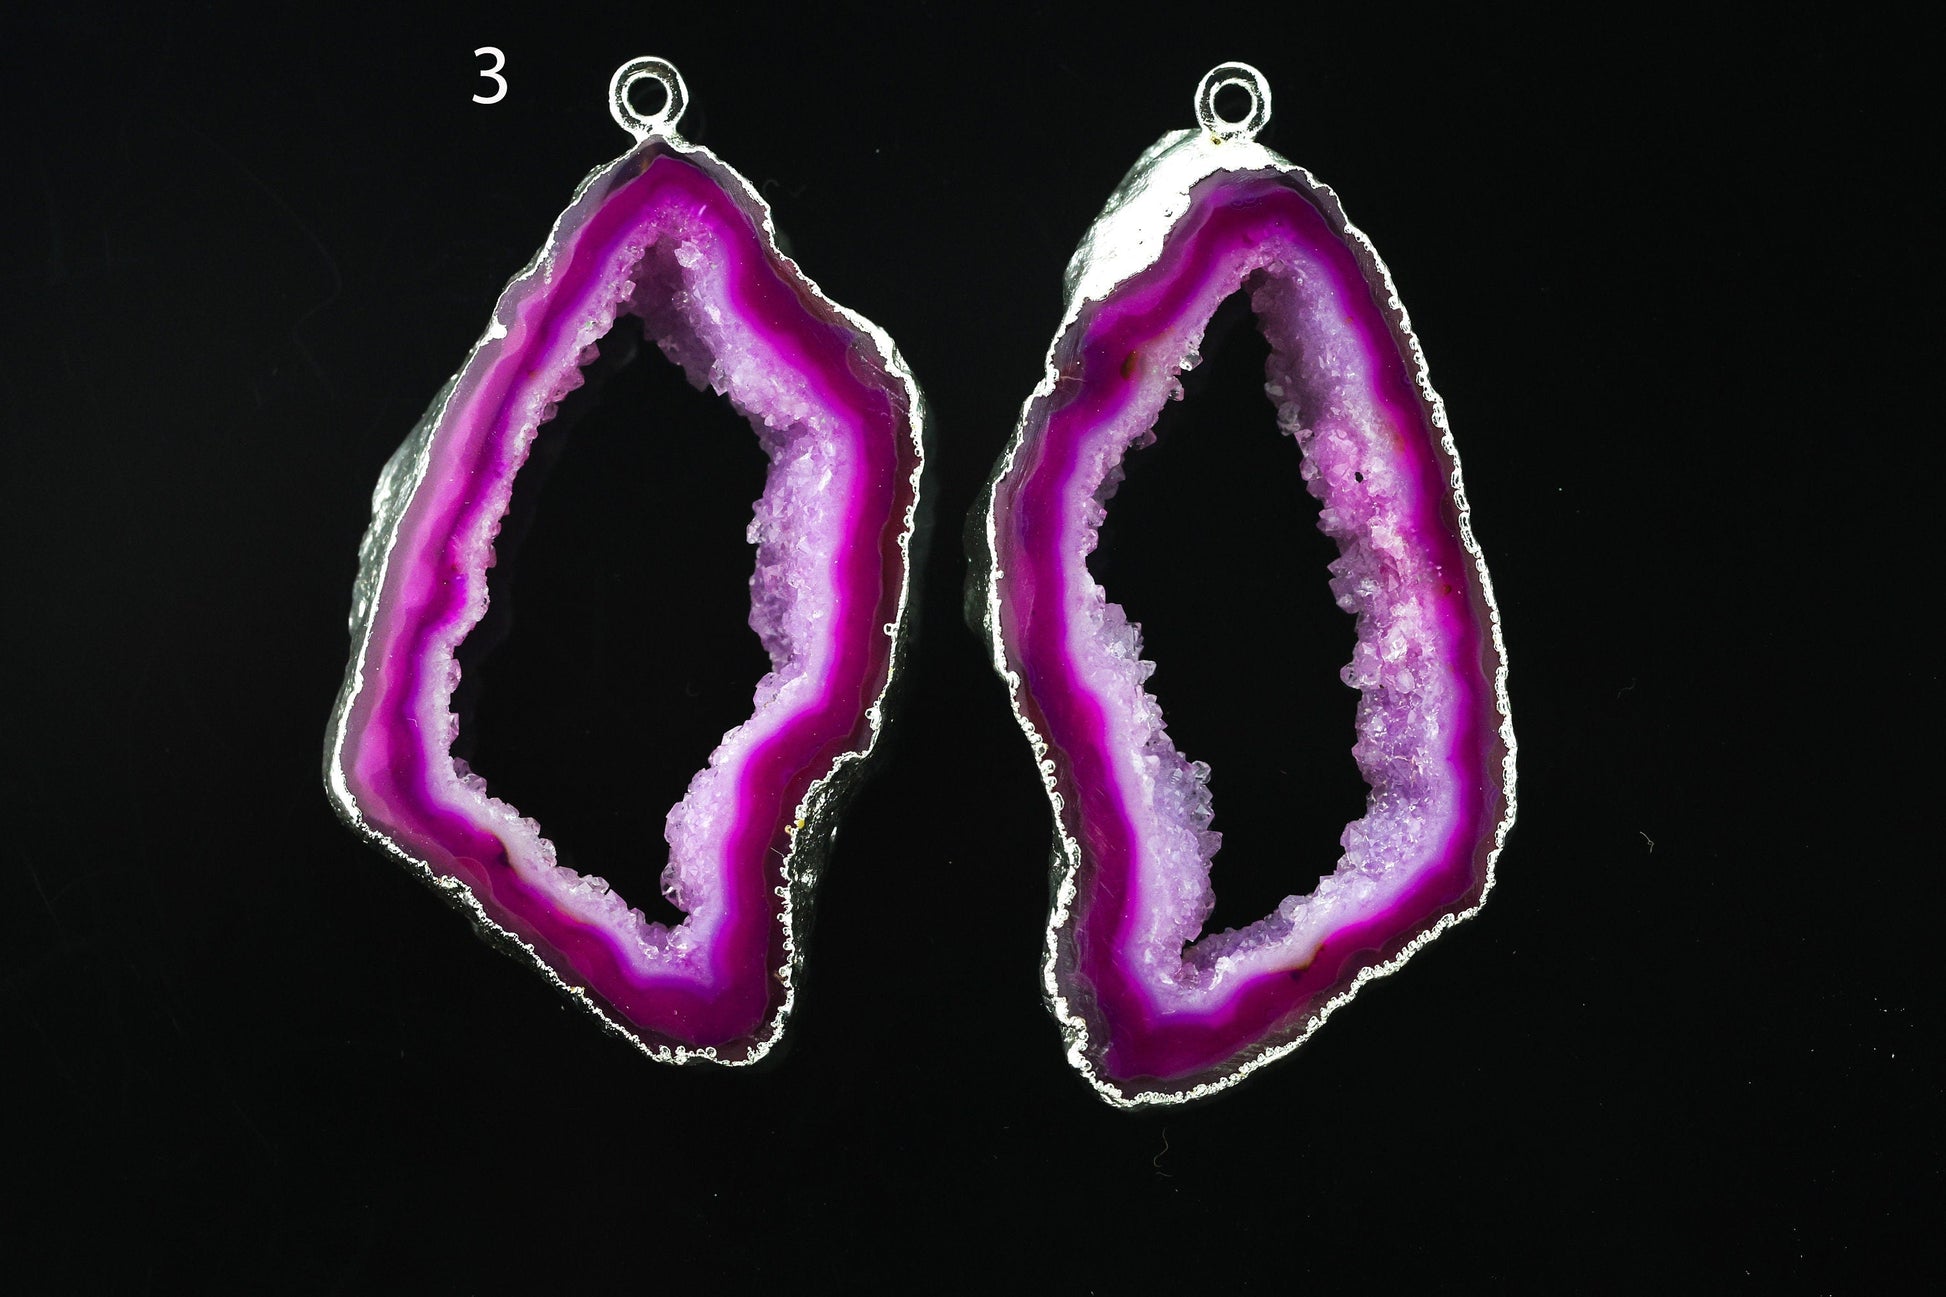 Silver Natural Agate Geode Slice Pairs Edged For Earrings - Meena Design